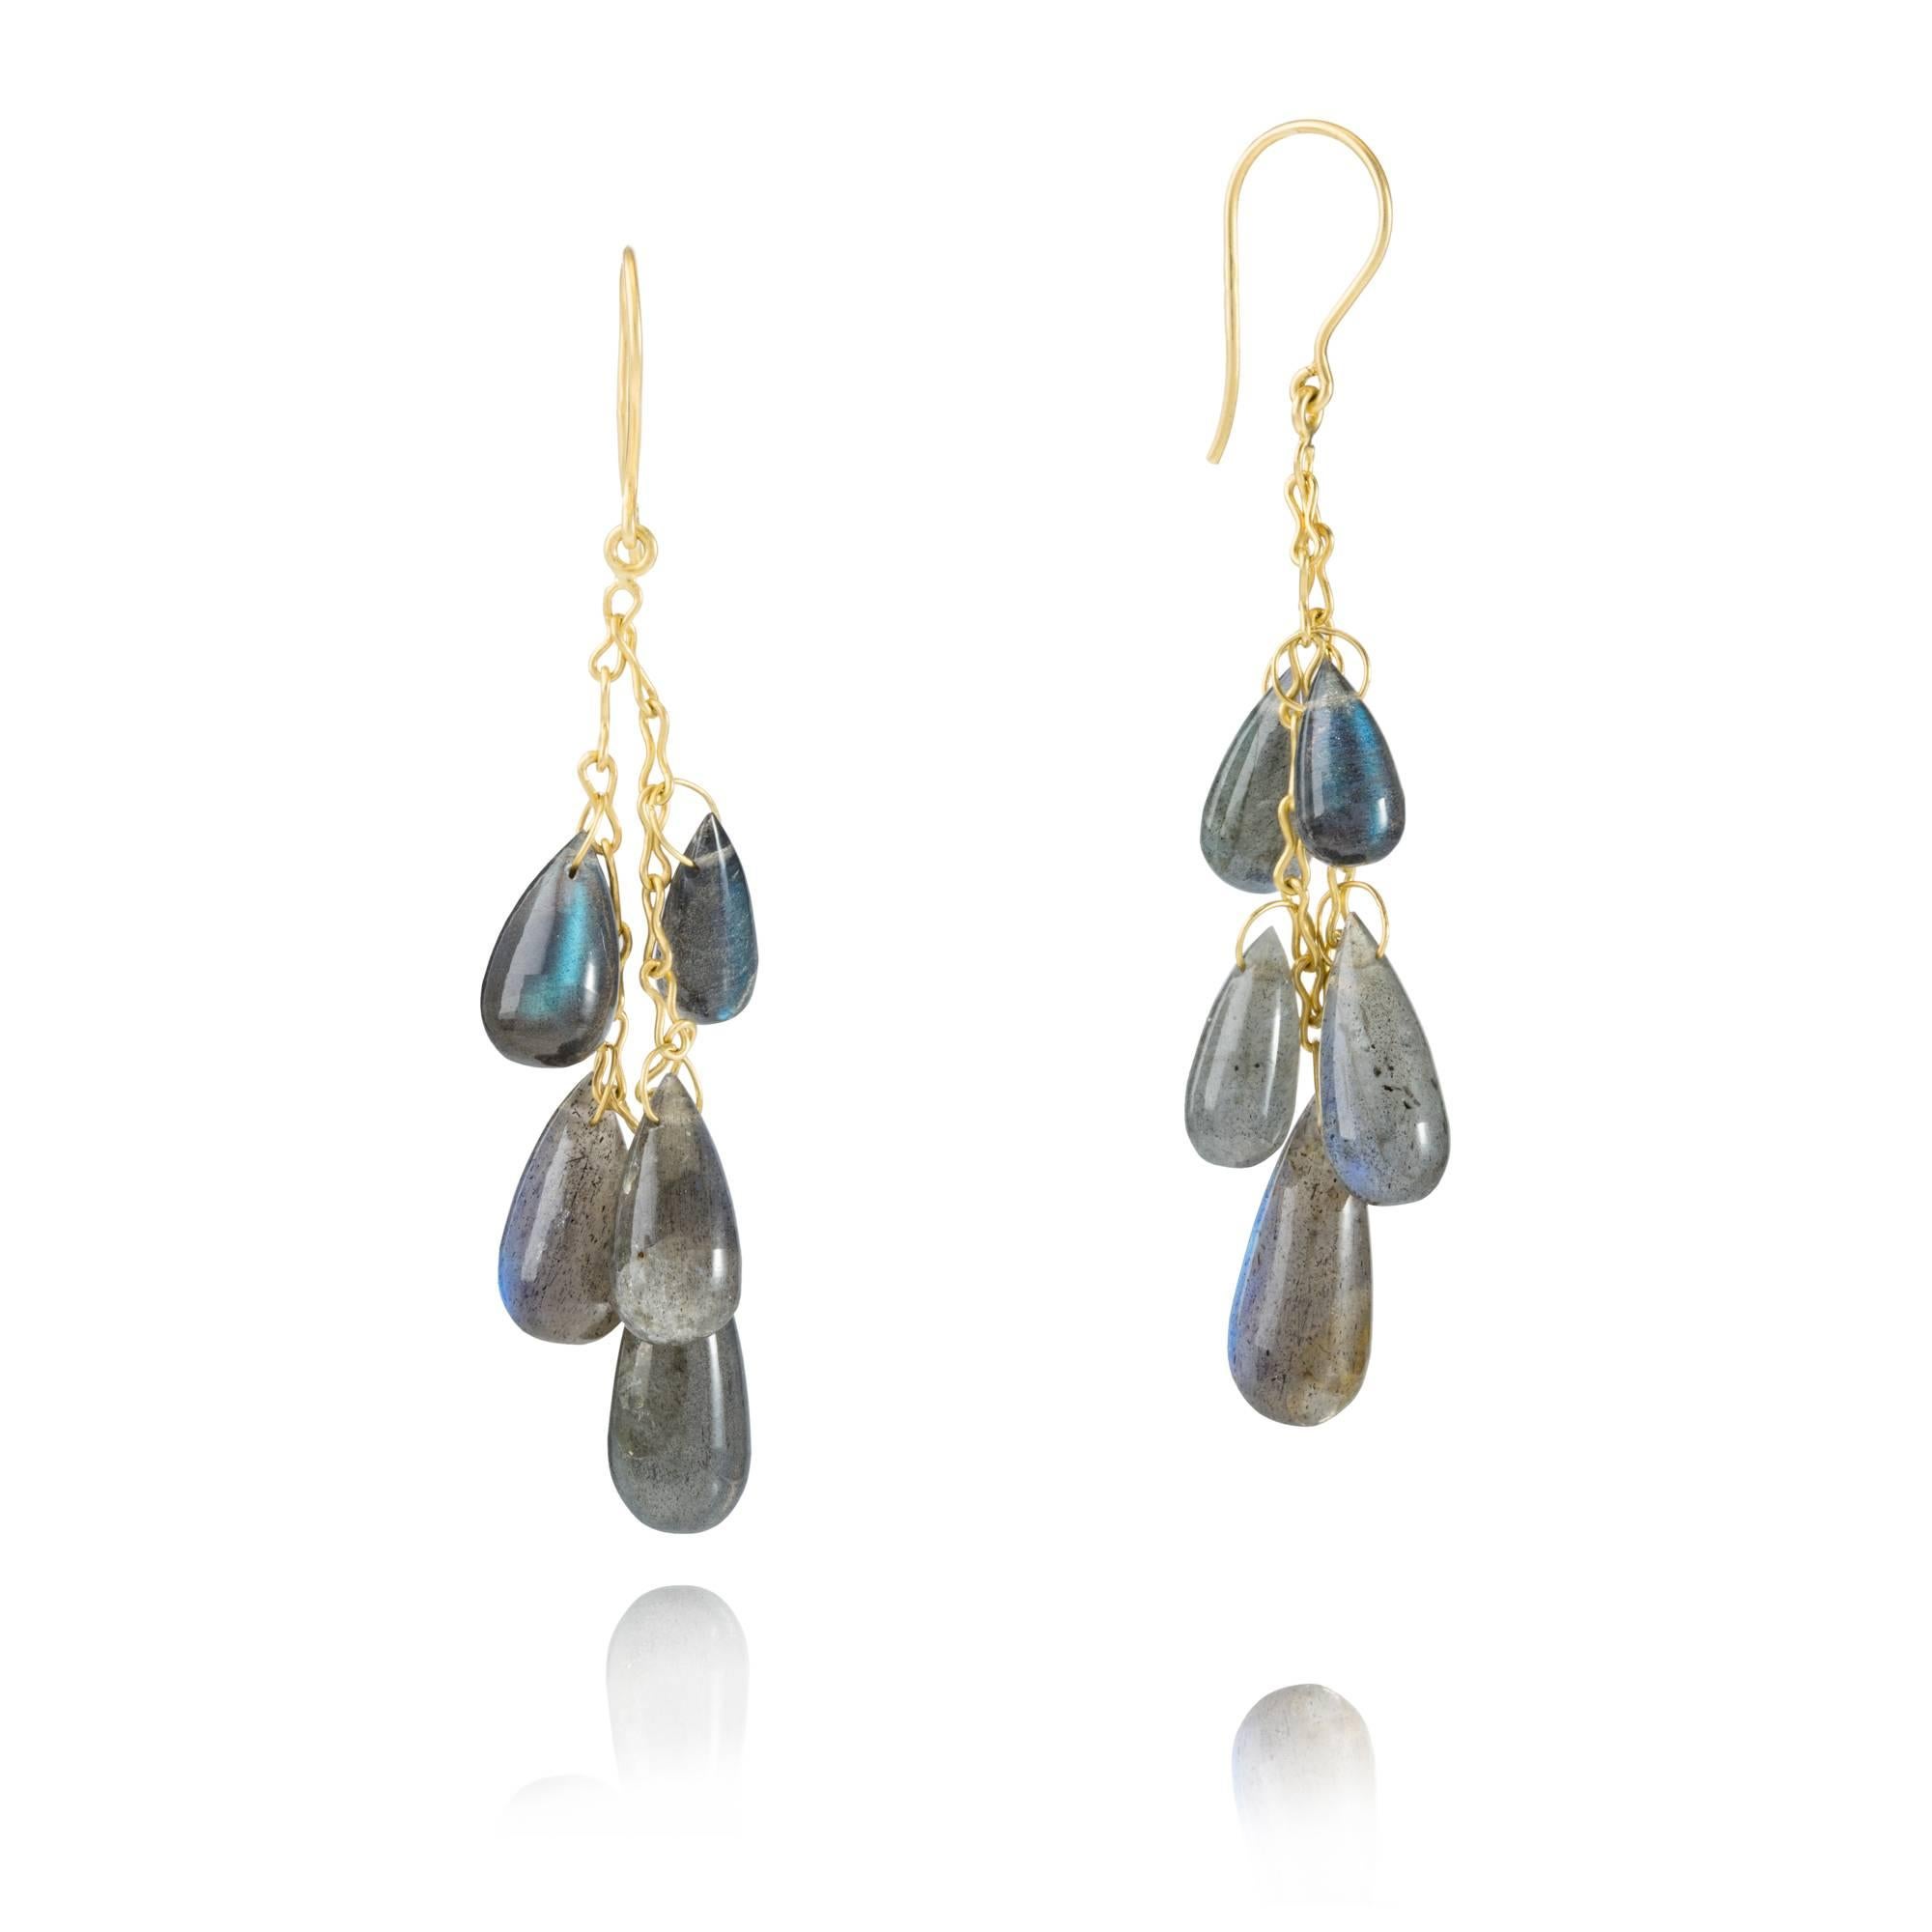 With beautiful Labradorite stones that move and dance as you do, the Studio 54 collection was designed in ode to 1970's New York. Flashing and dashing, these beautiful pendants flash vibrant blue as they catch the light.